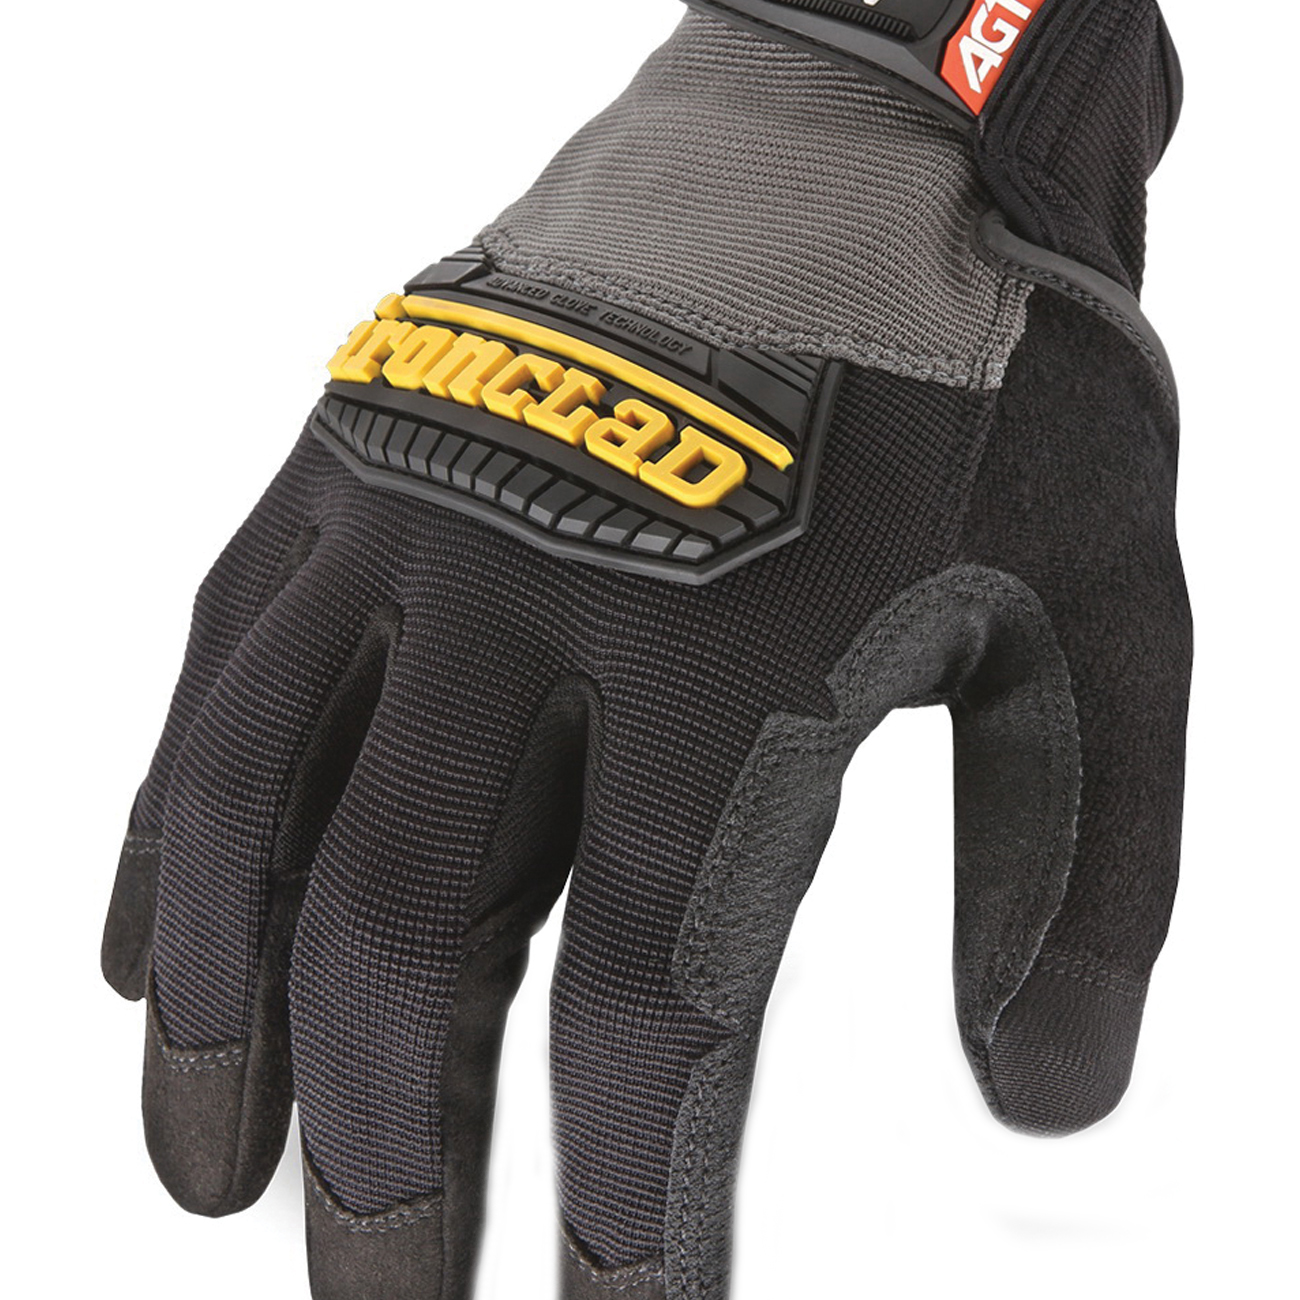 Ironclad HEAVY UTILITY HUG-03-M Gloves, Men's, M, Hook-and-Loop Cuff, Leather/Spandex, Black/Gray - 1